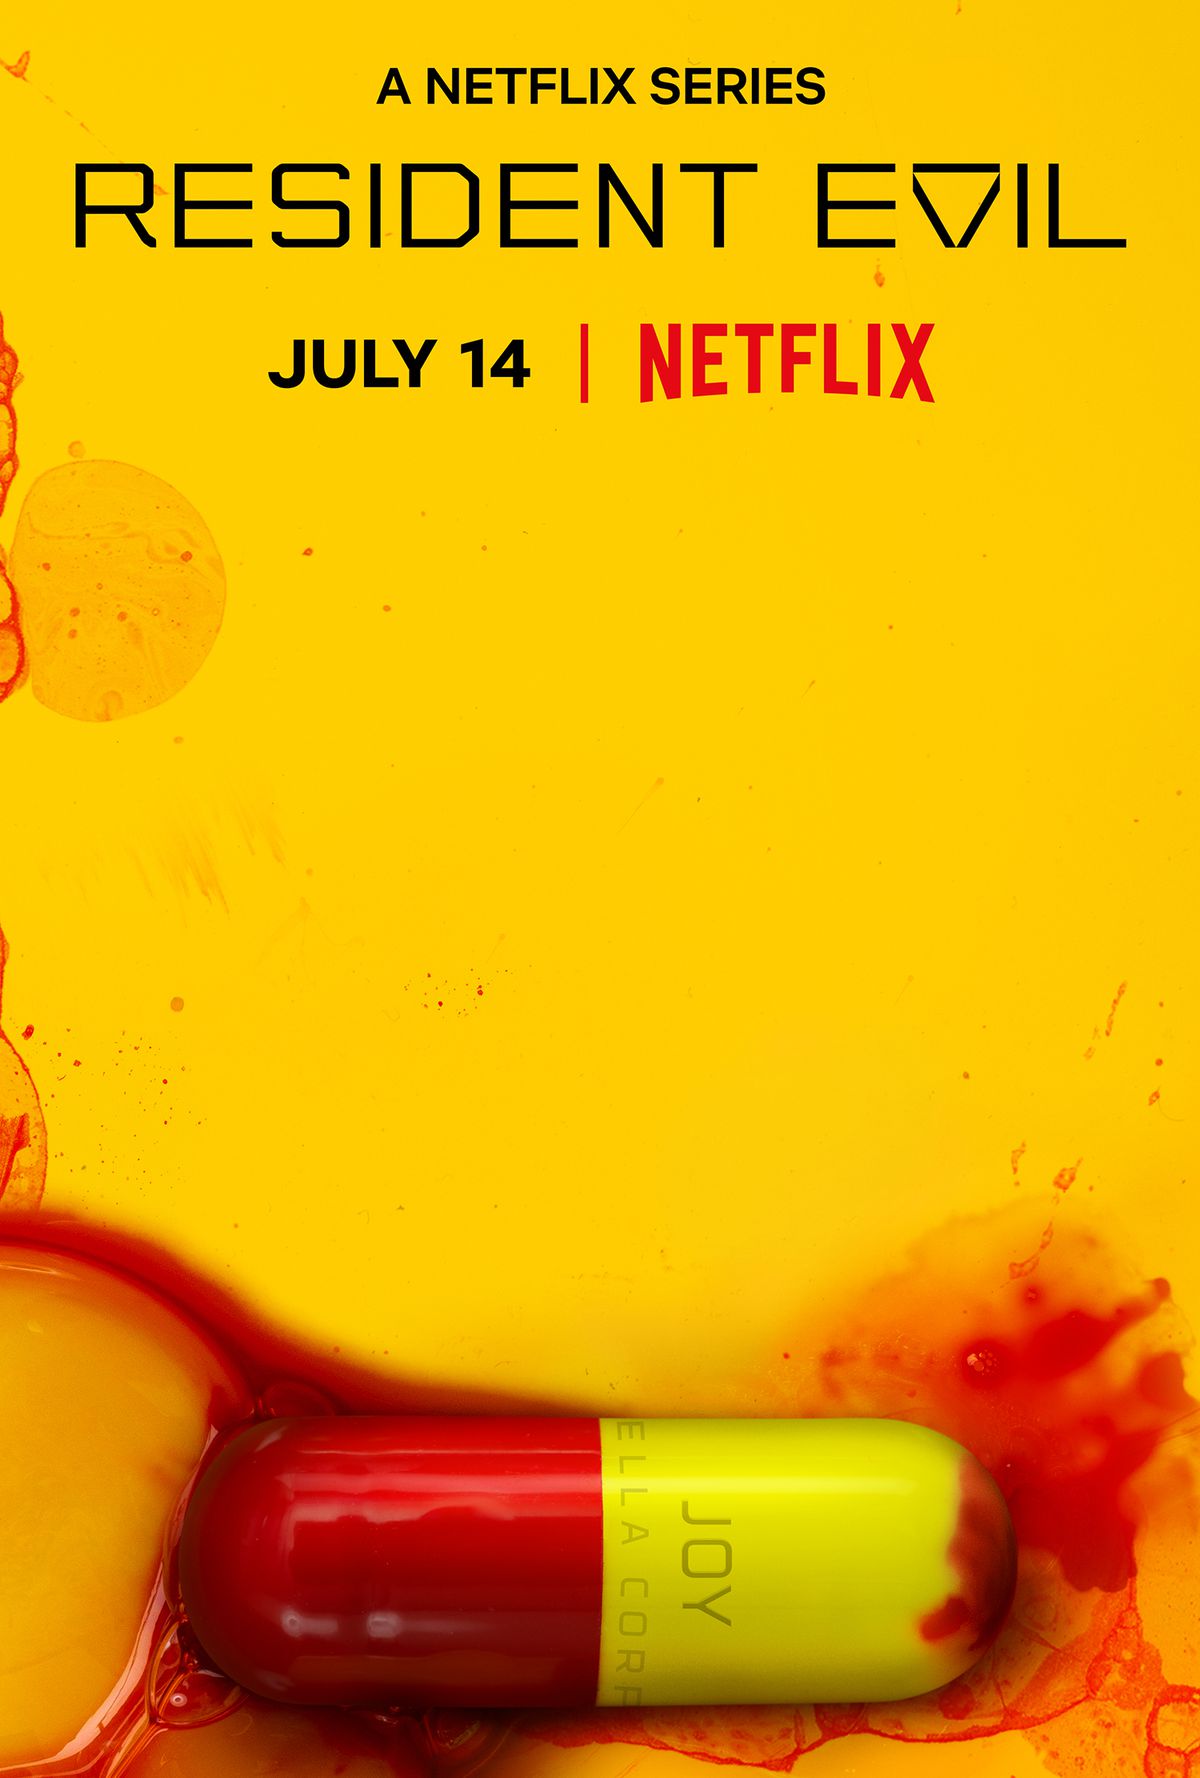 A red and yellow pill on a yellow background